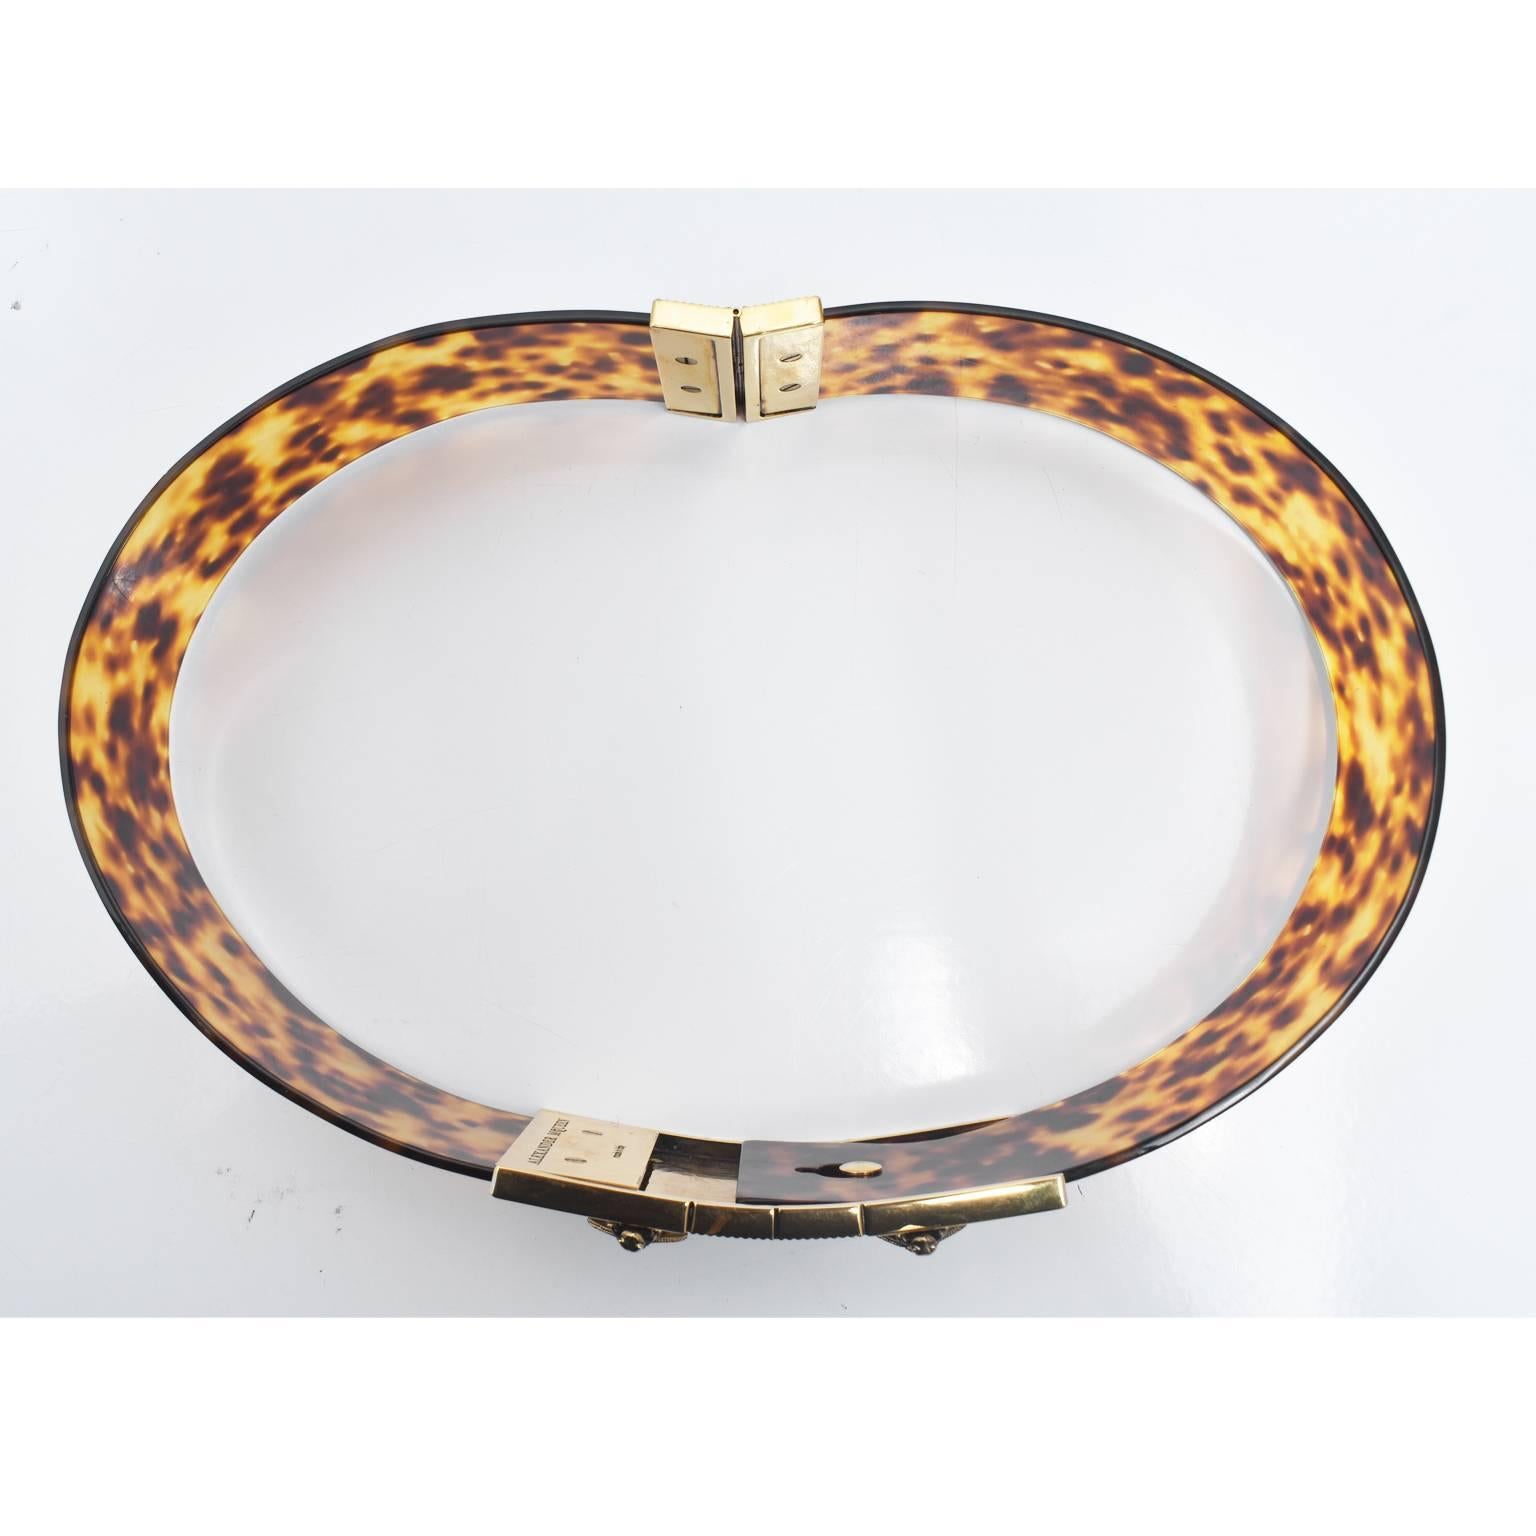 Brown Alexander McQueen Tortoiseshell Perspex Belt with Gold Clasp and Bees S/S13 For Sale